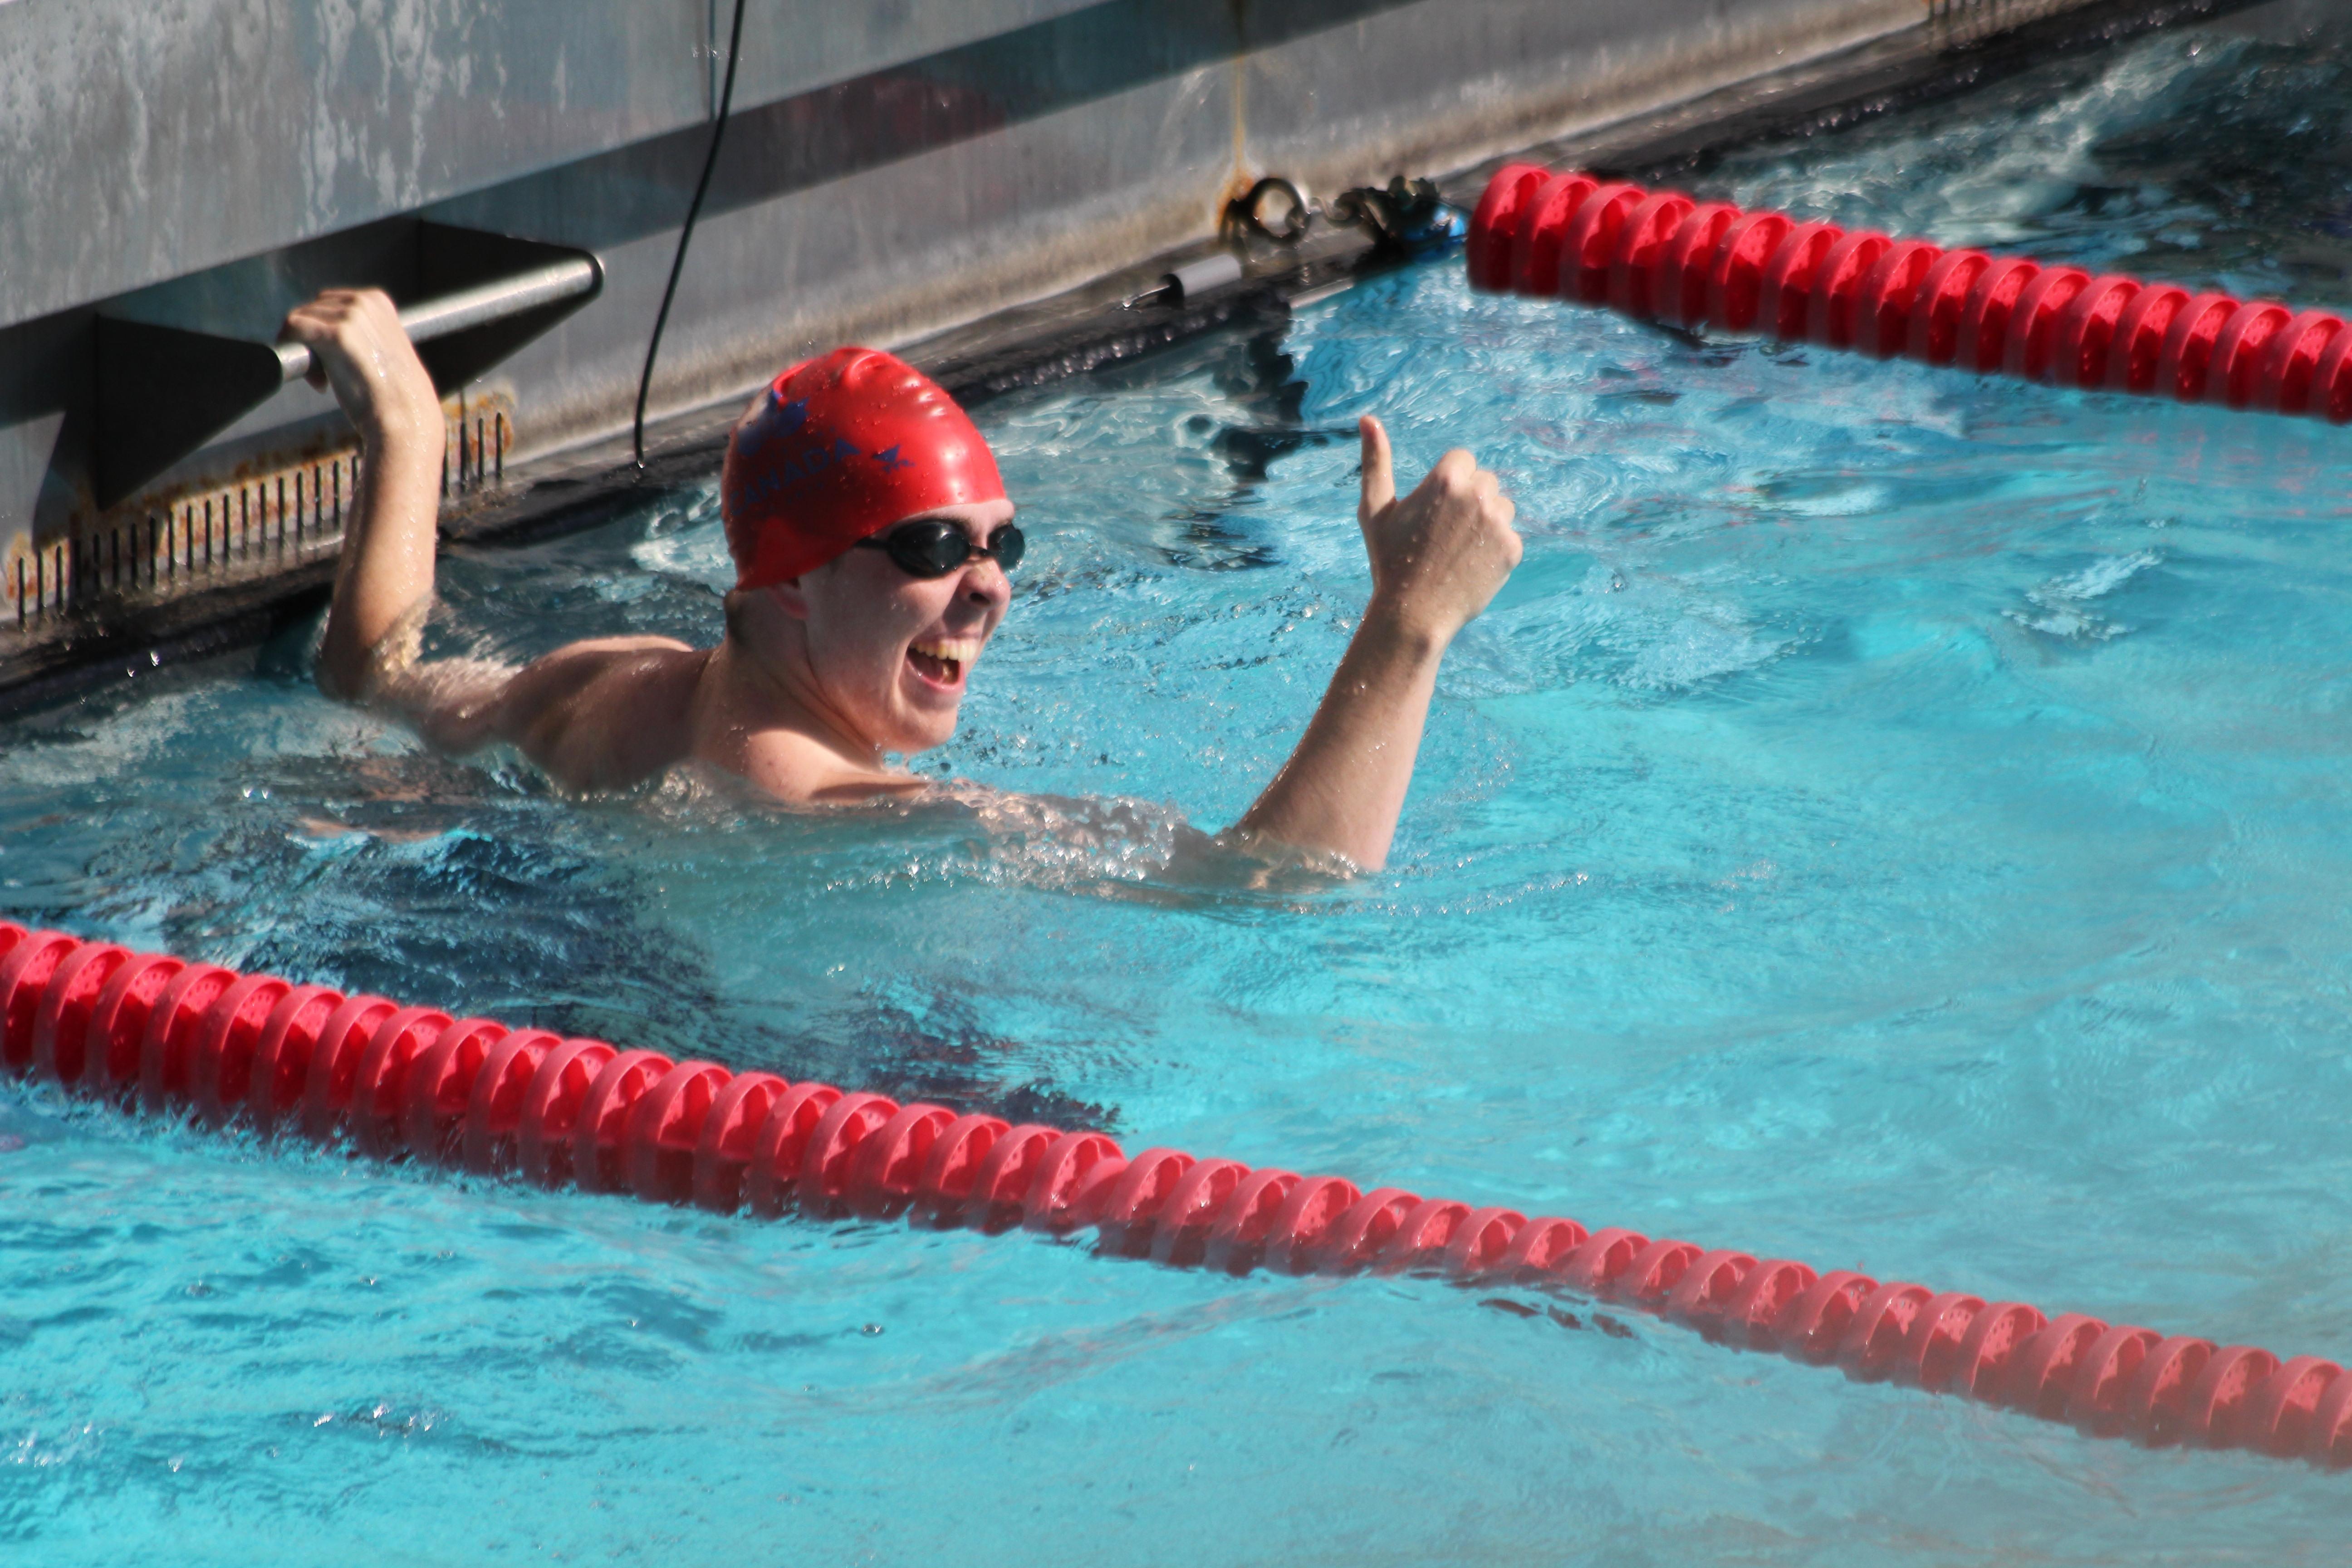 BIG WIN – Elliott Moskowy celebrates after one of his wins during the 2015 Special Olympics World Summer Games in Los Angeles.